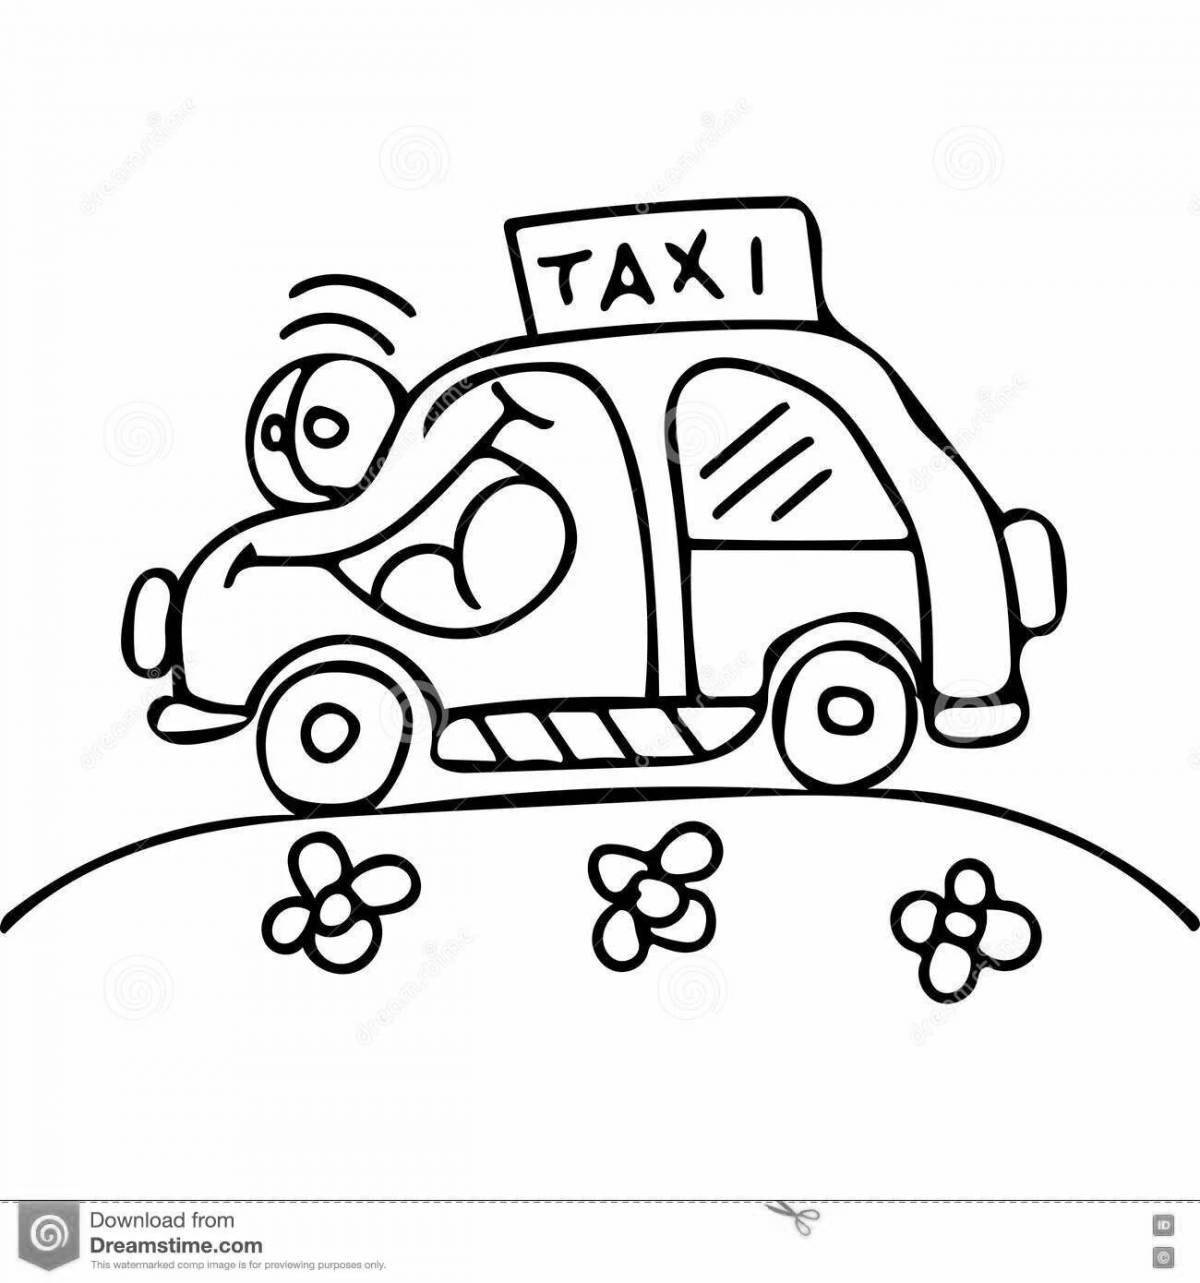 Coloring book nice taxi for children 3-4 years old